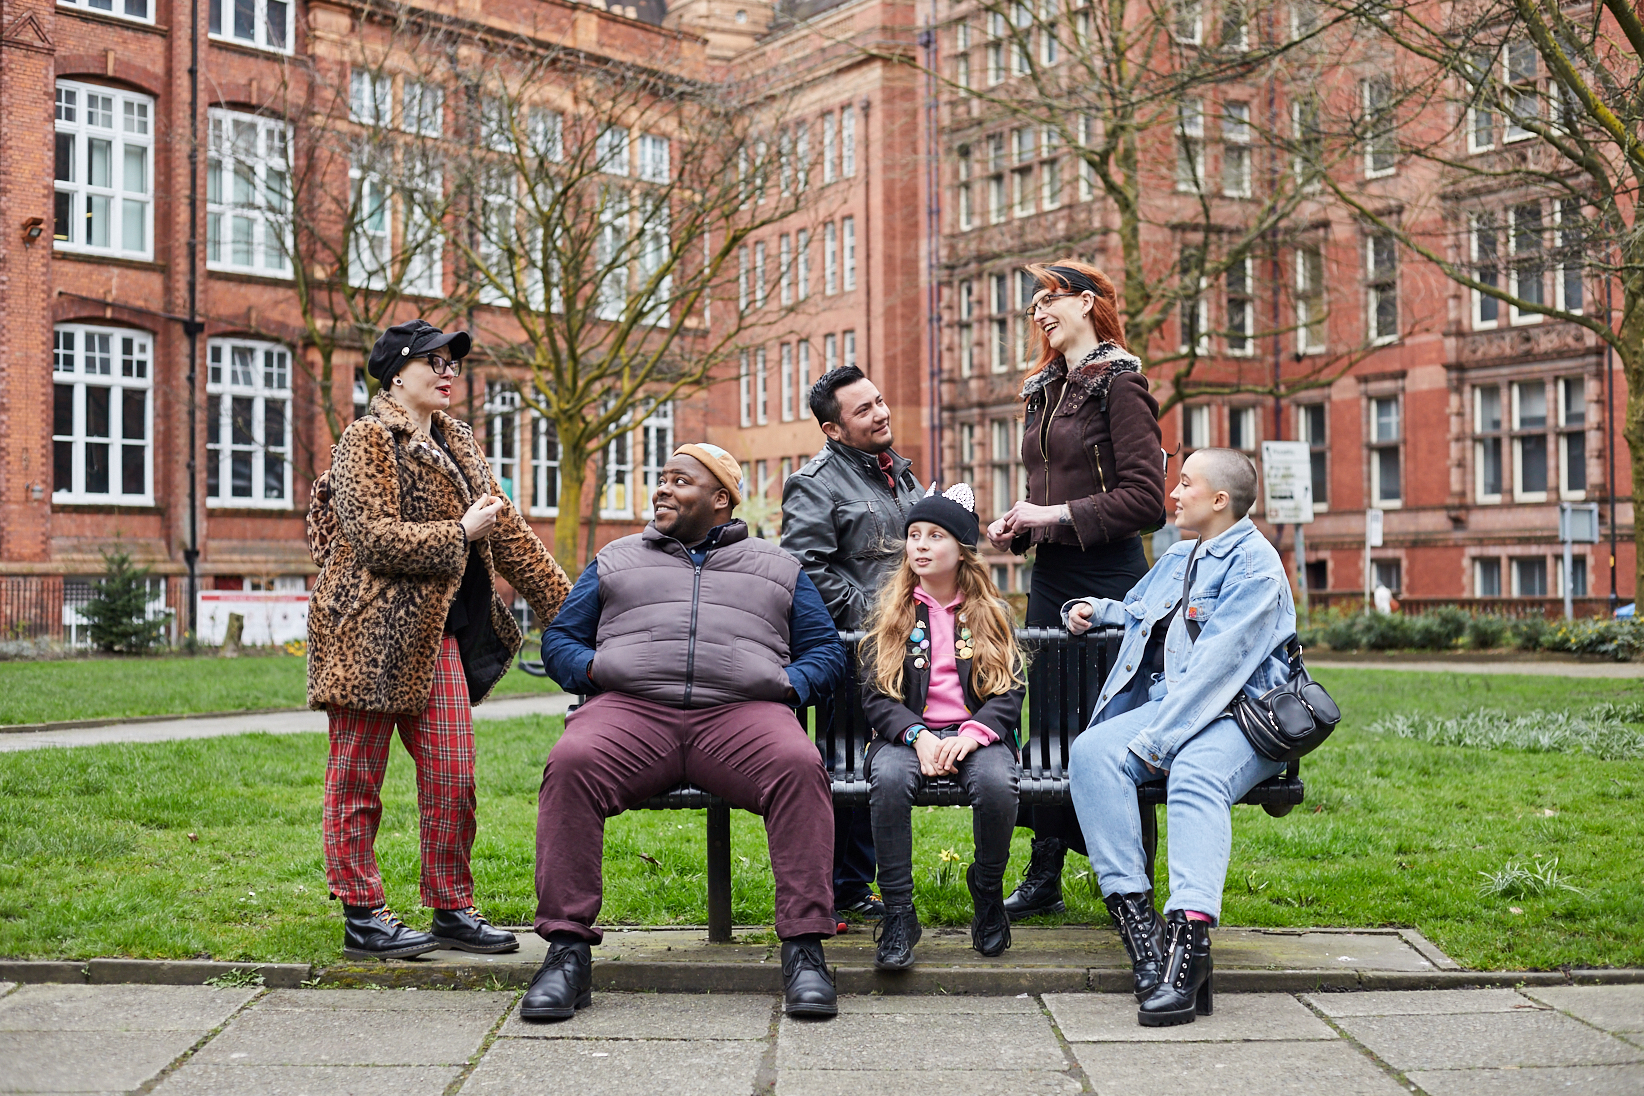 Five people talking around a bench in garden. A black man, a young child in beanie with cat ears and a fem-presenting person in denim jacket sitting, while a fem-presenting person in fur-coat, a trans man and a trans woman standing behind, all talking.